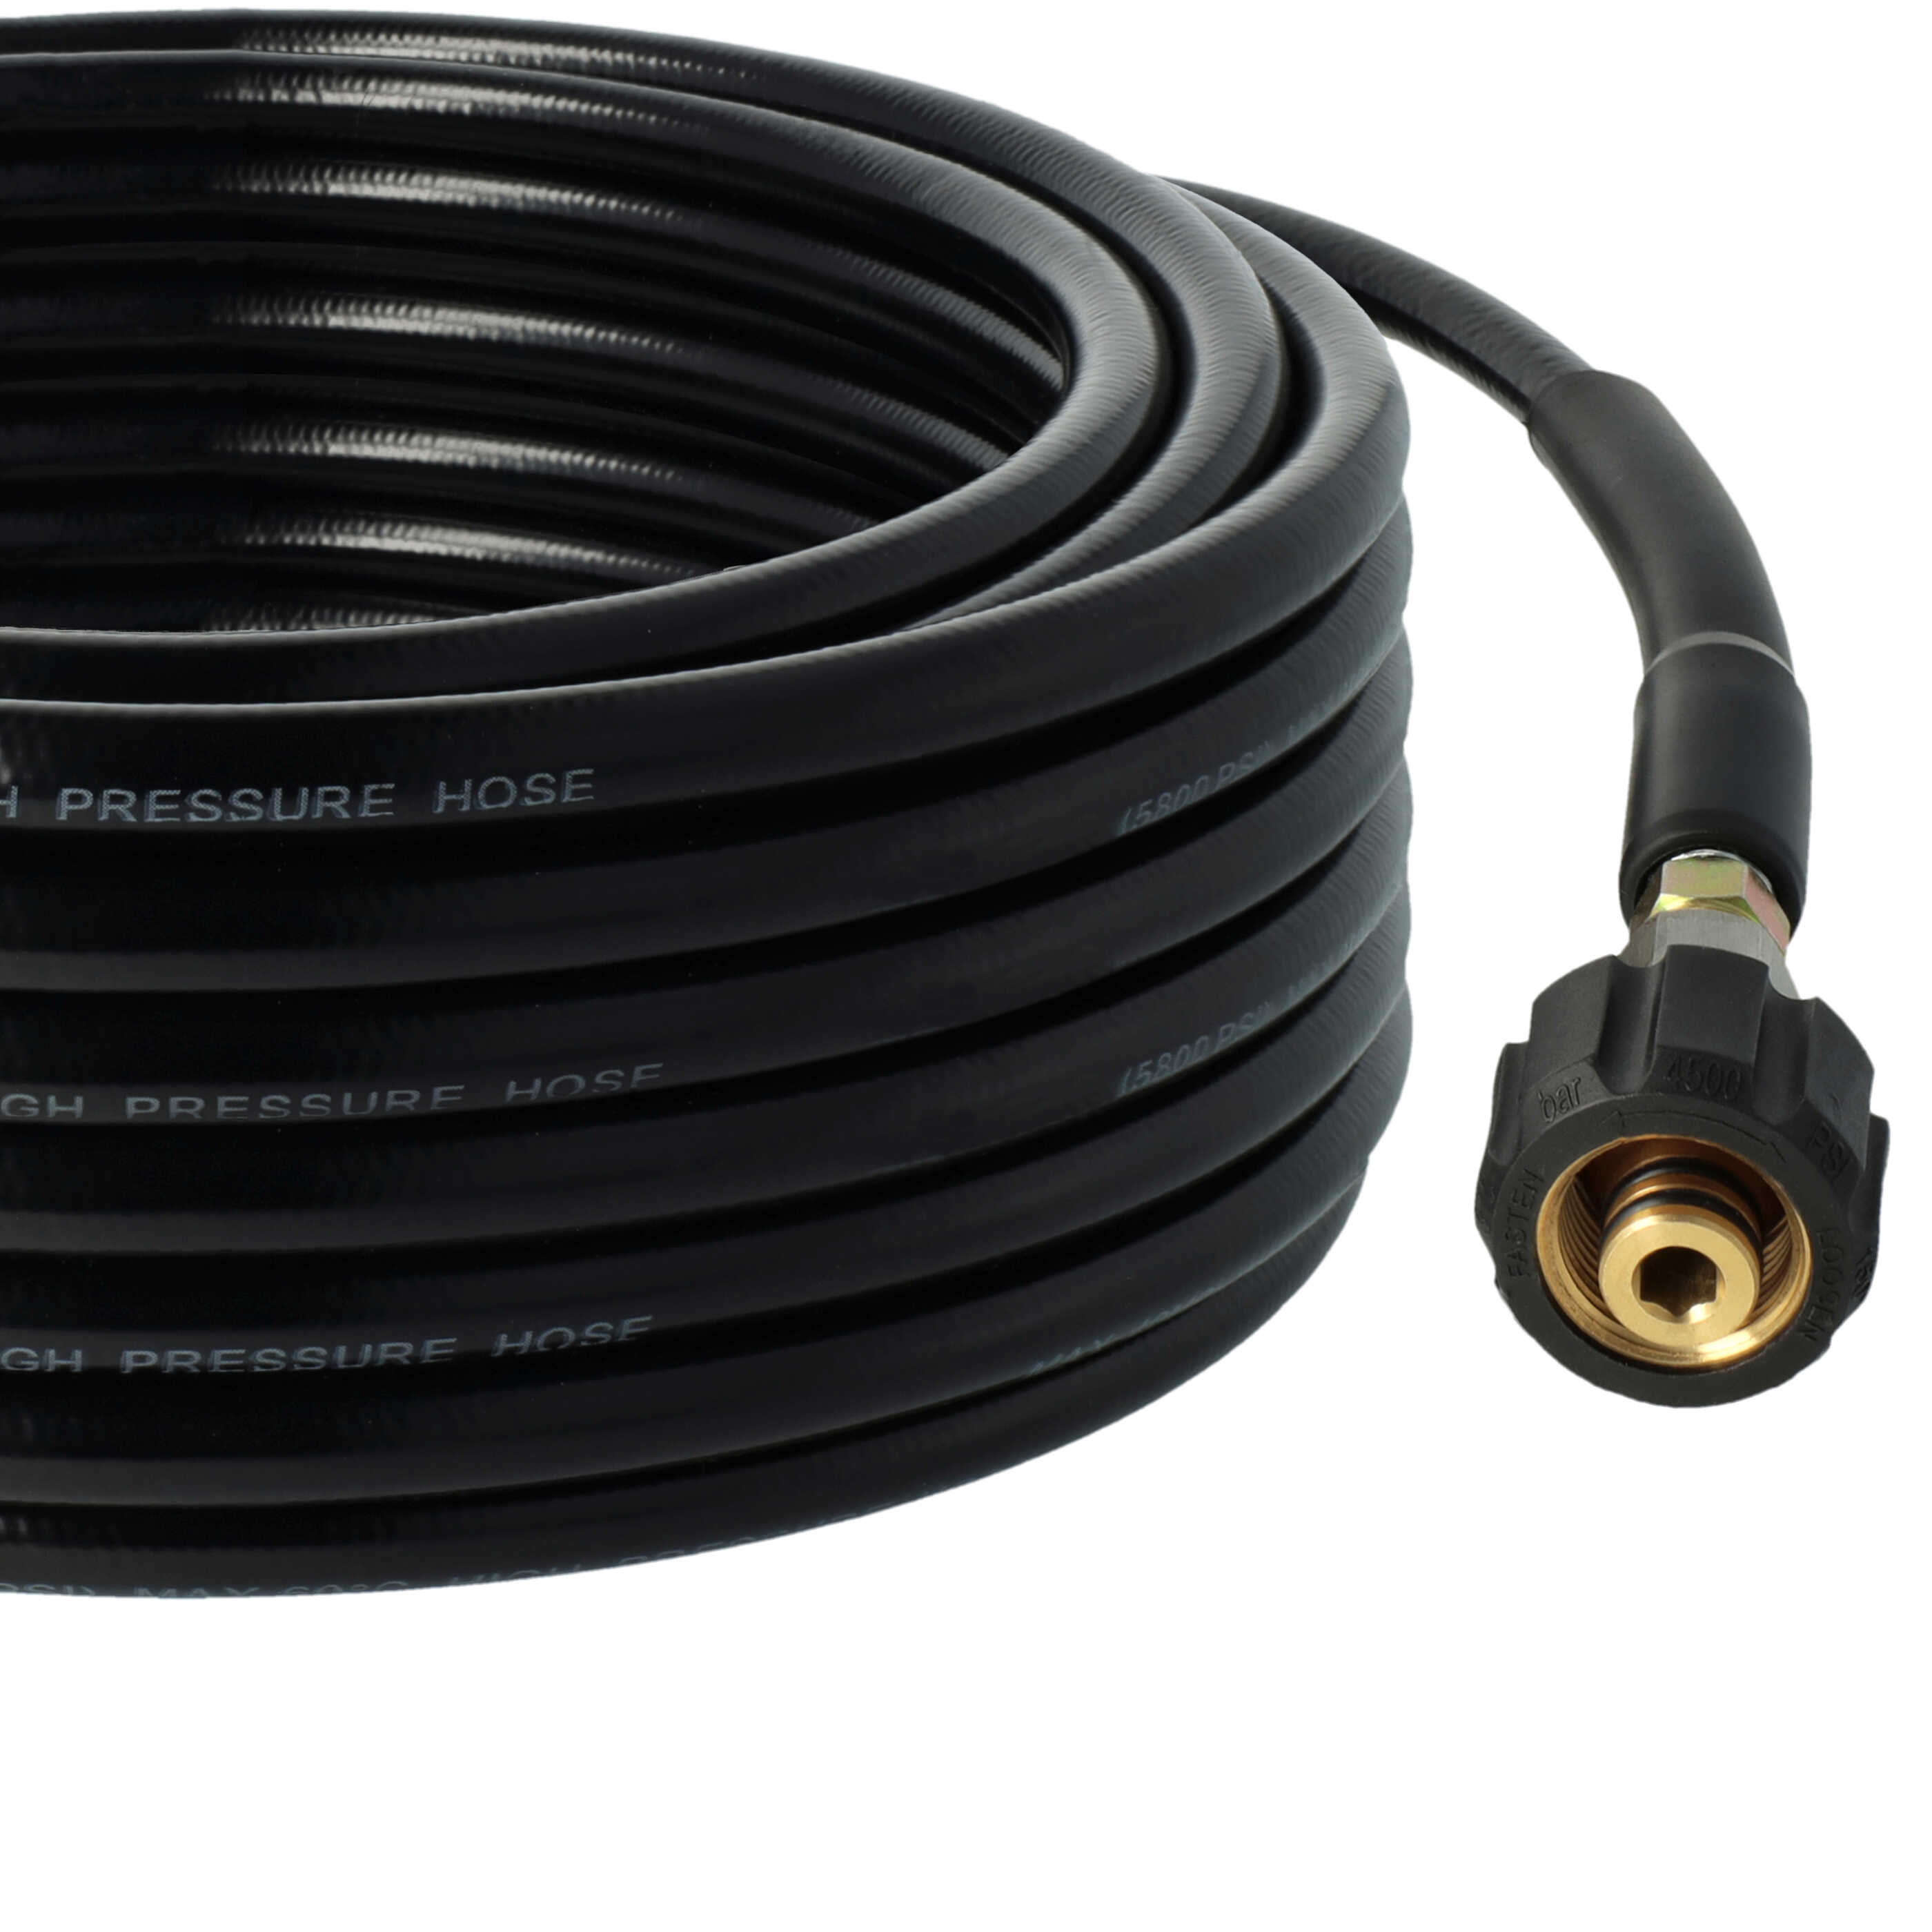 vhbw 20 m Extension Hose High-Pressure Cleaner with M22 x 1.5 Threaded Connection Black